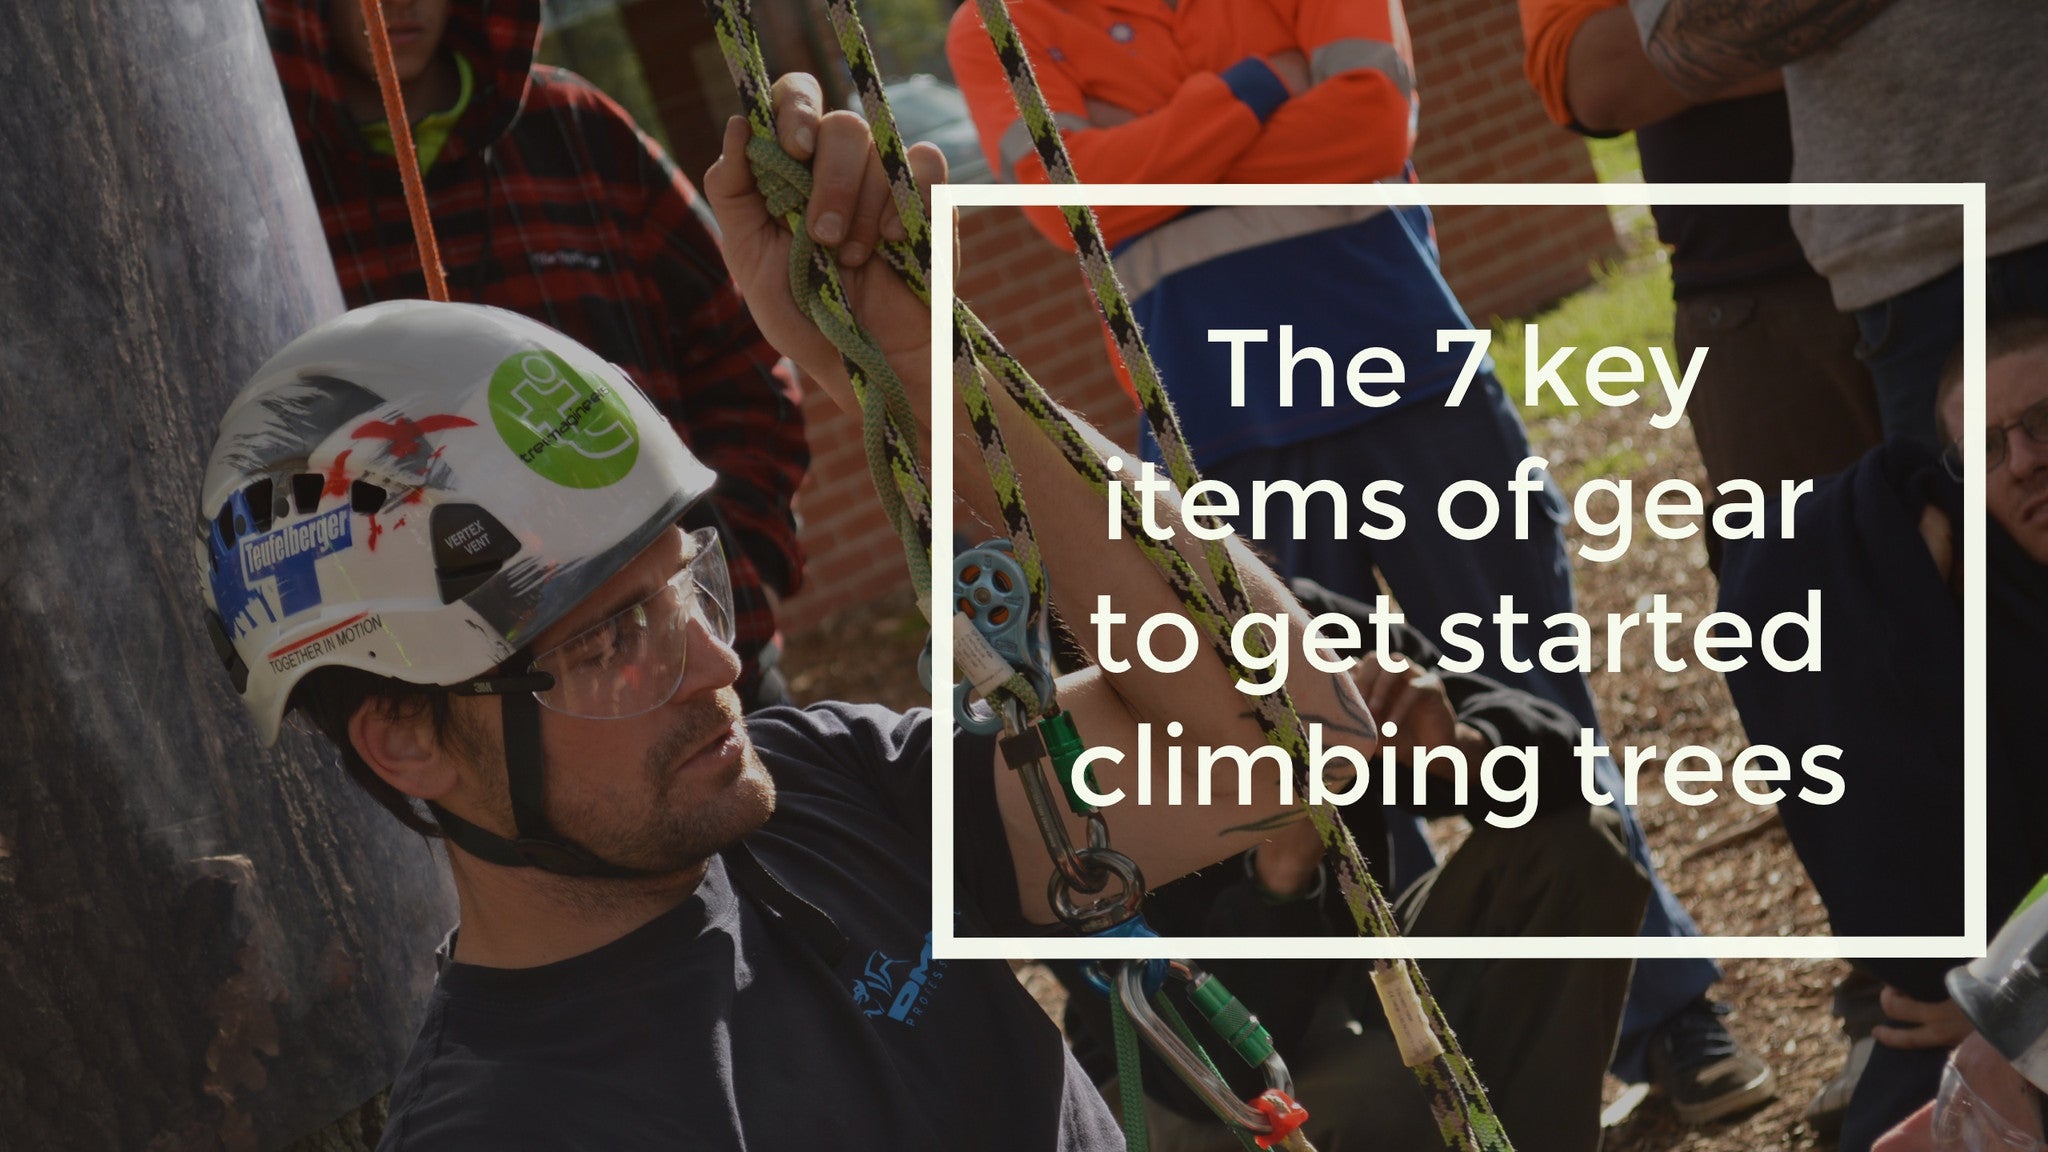 New to Tree Climbing? Here's the 7 key items of gear you need to